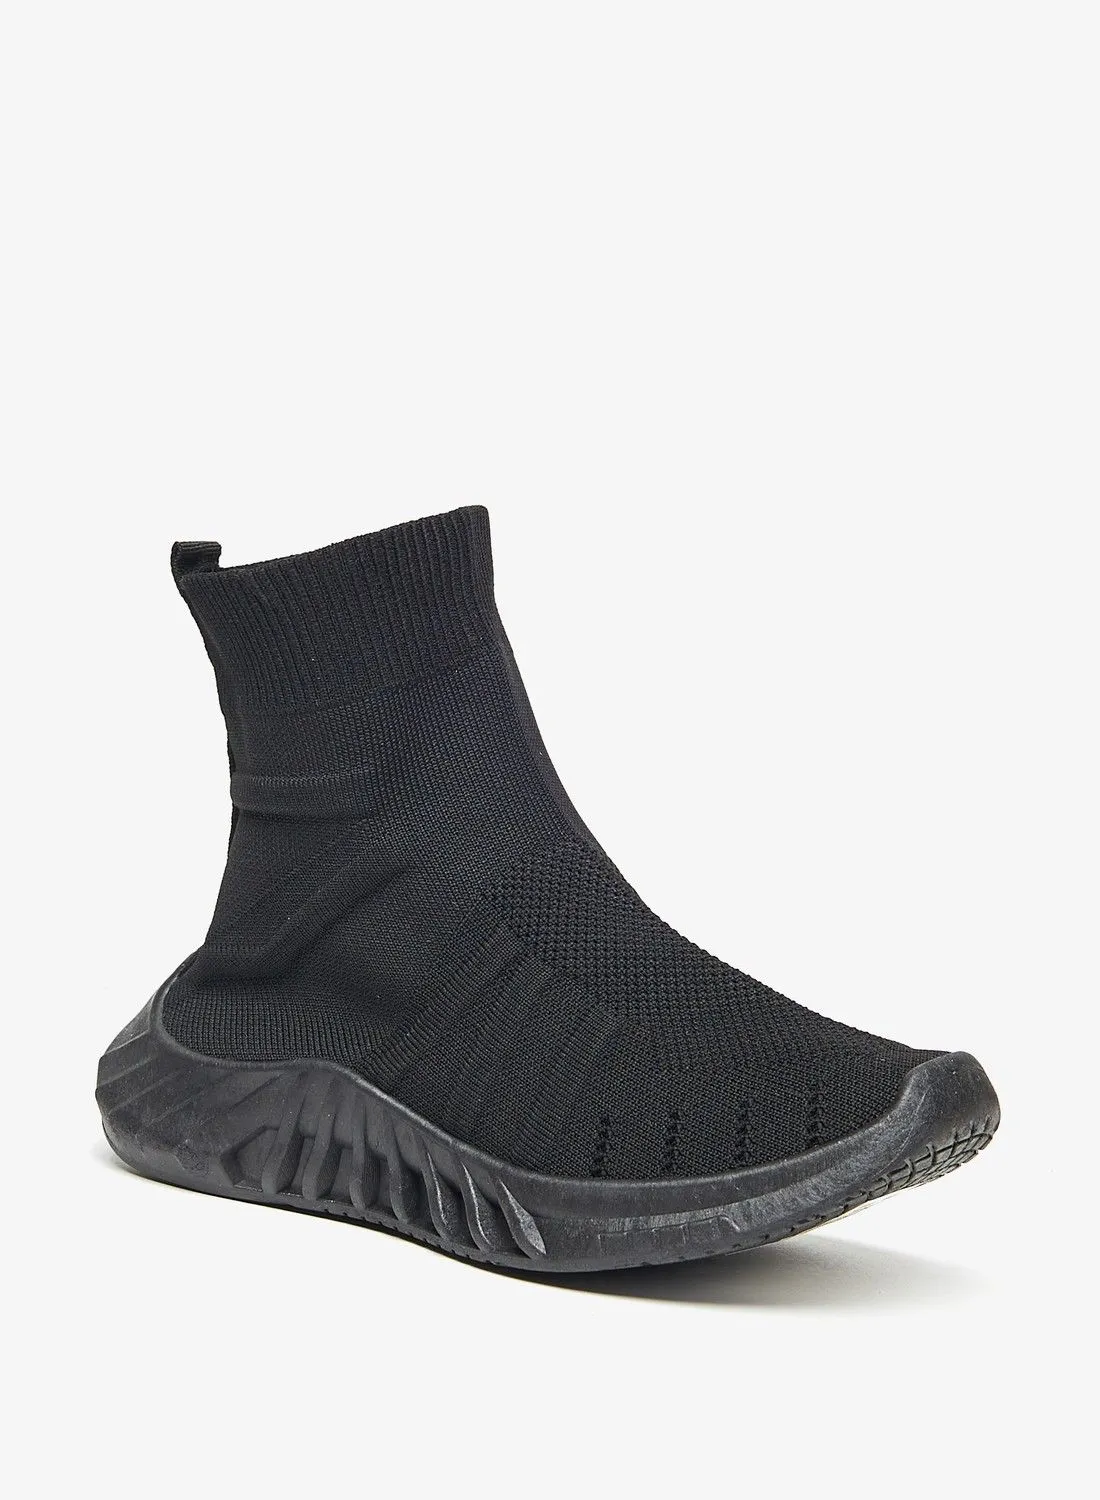 shoexpress Textured Slip On High Top Sneakers with Pull Tabs Black